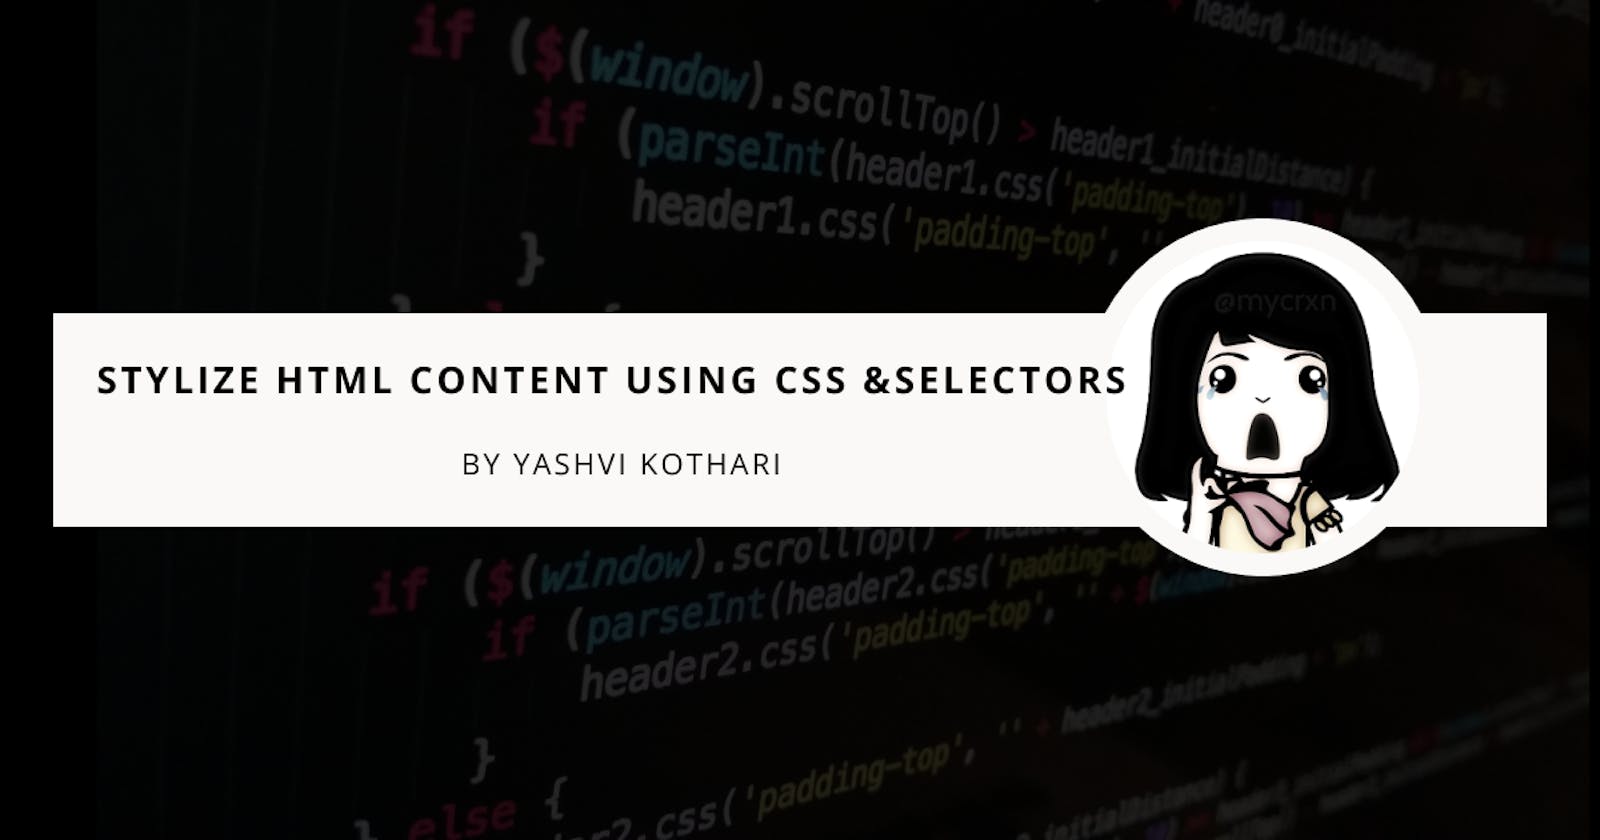 Stylize HTML Content using CSS &itsselectors